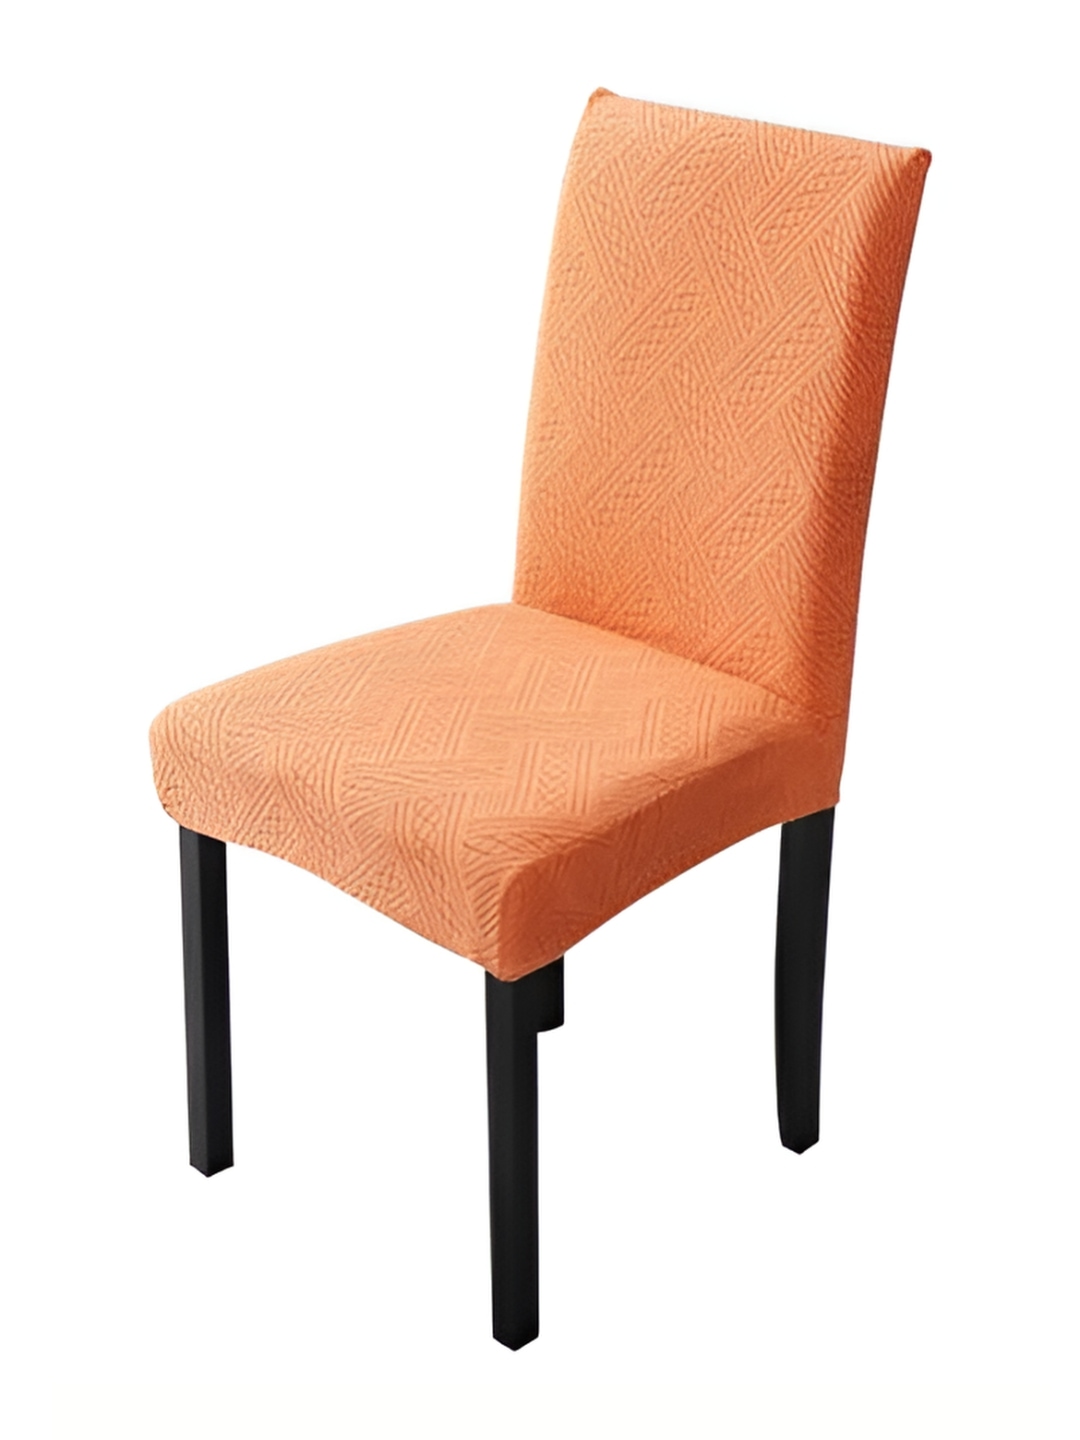 

HOUSE OF QUIRK Orange Colored Stretchable Chair Cover